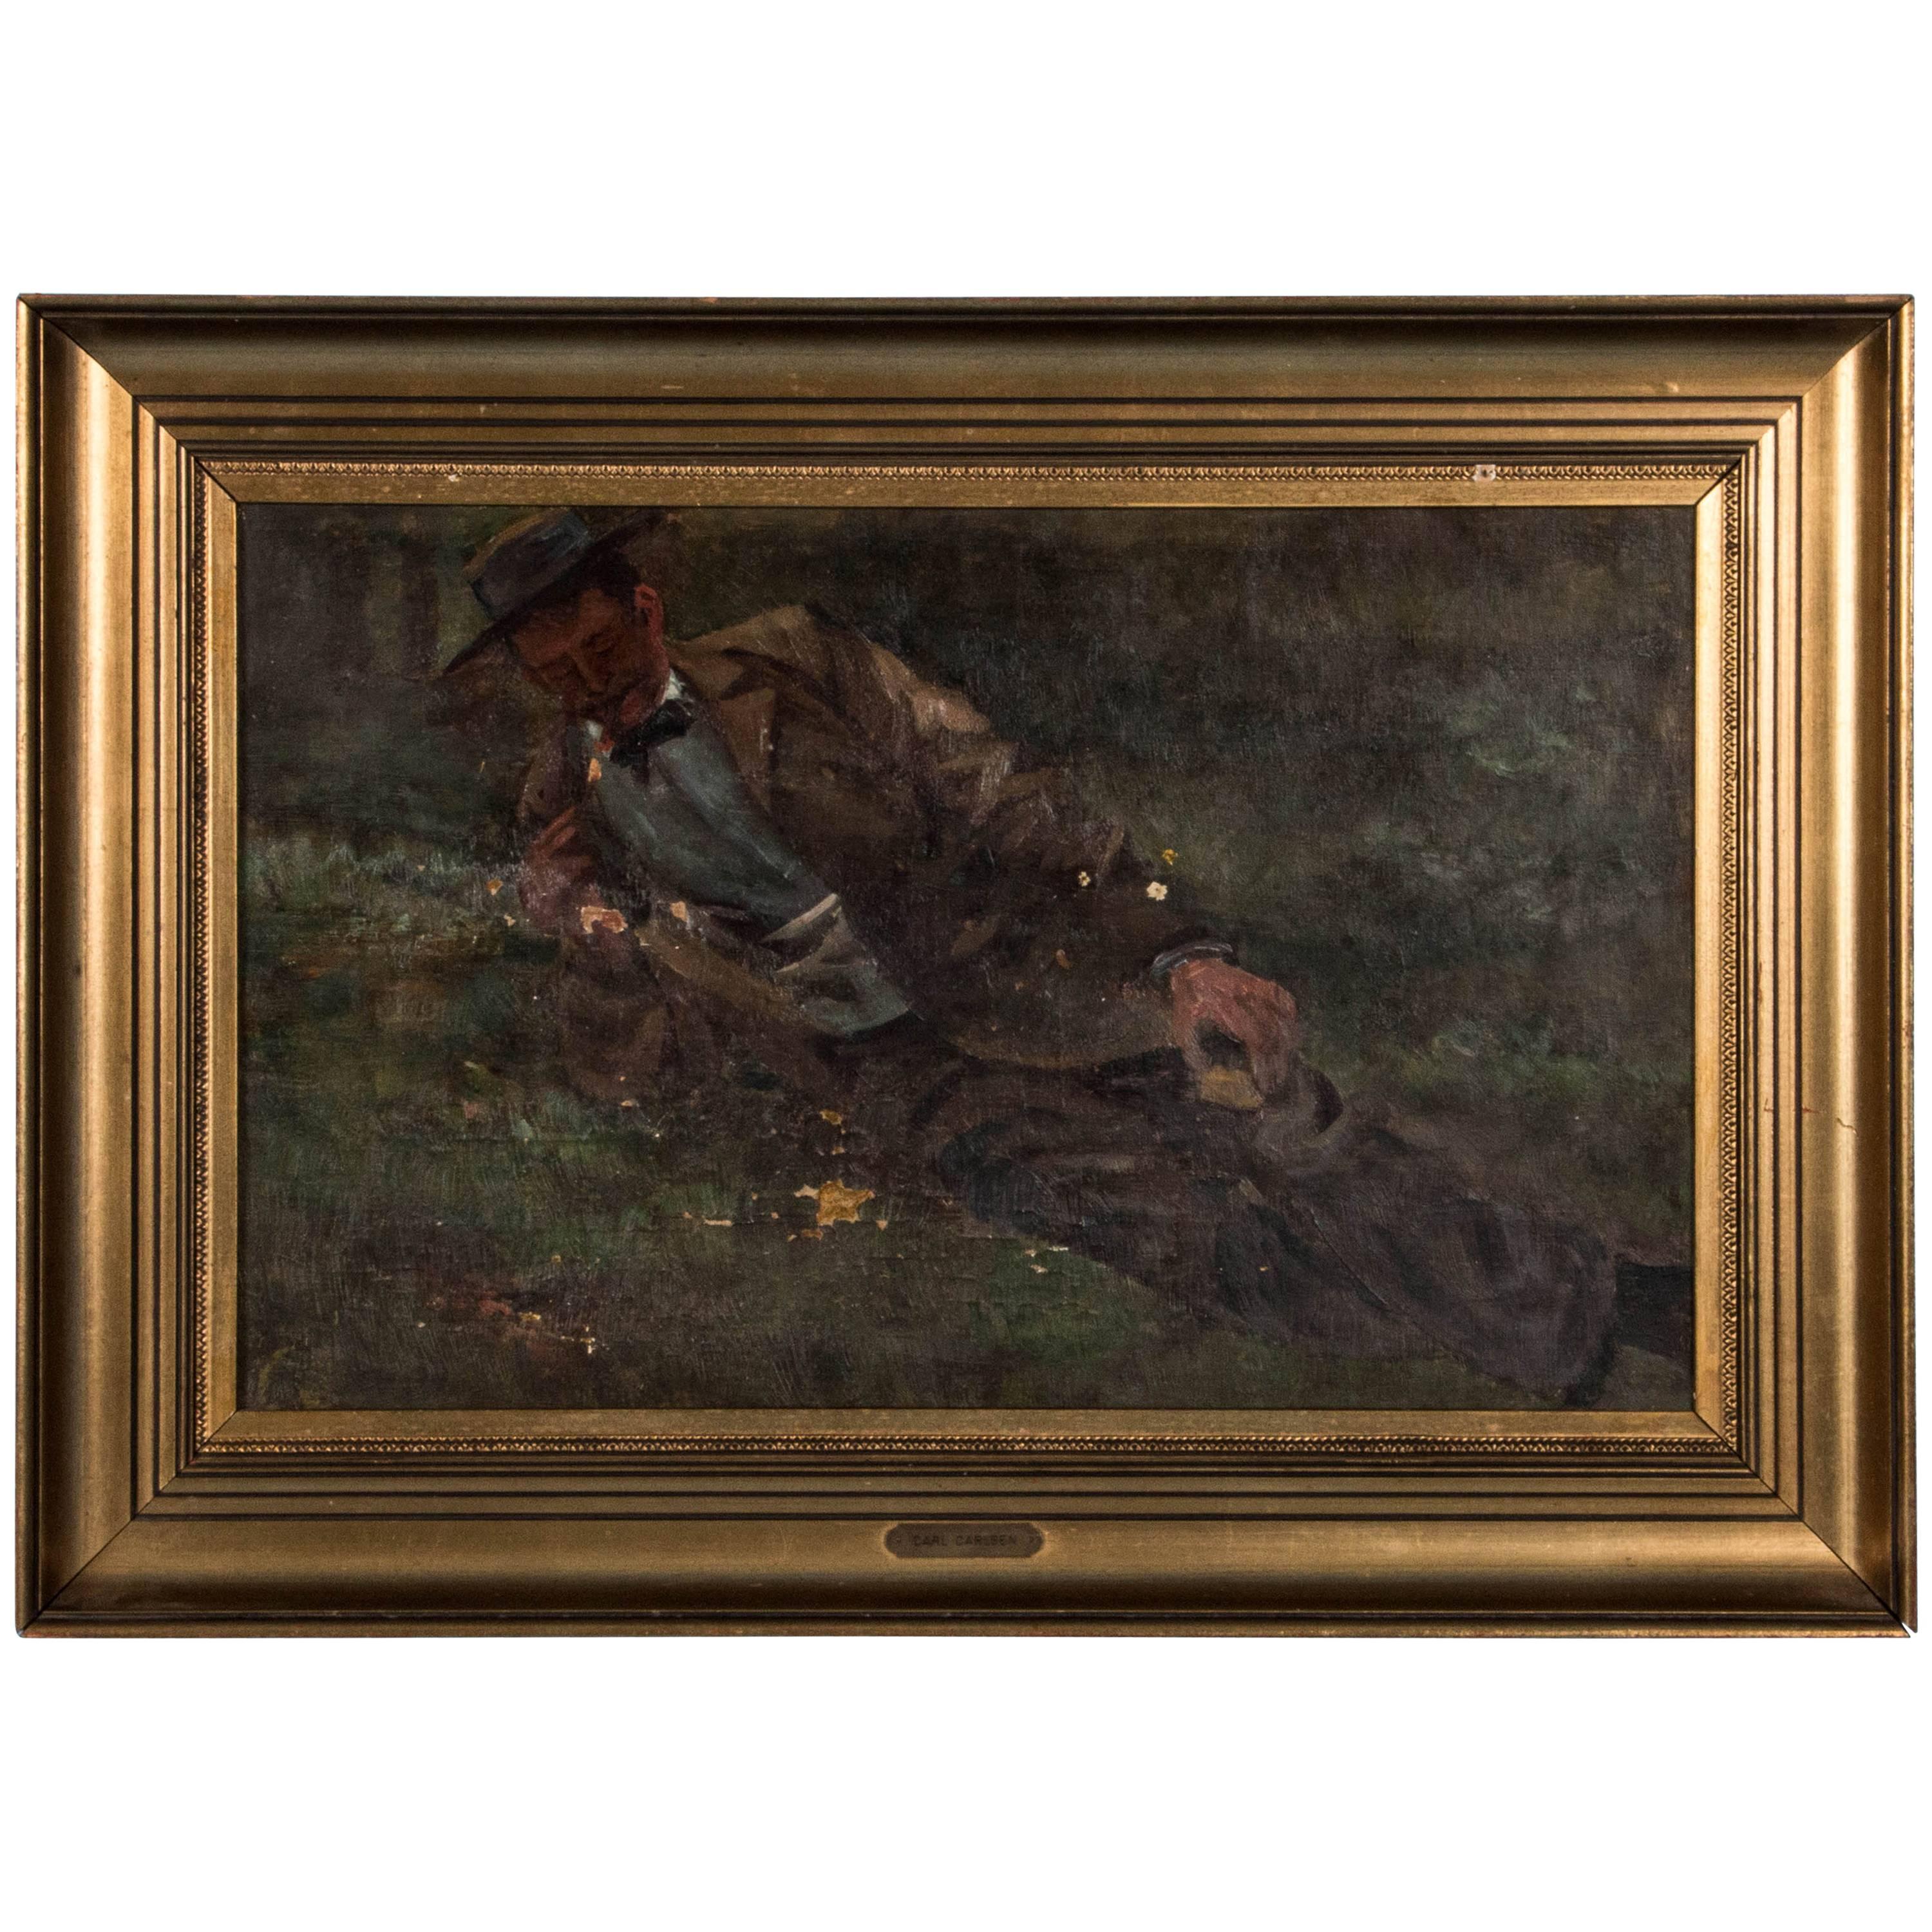 Antique 19th Century, Oil on Canvas Painting by Carl Carlsen